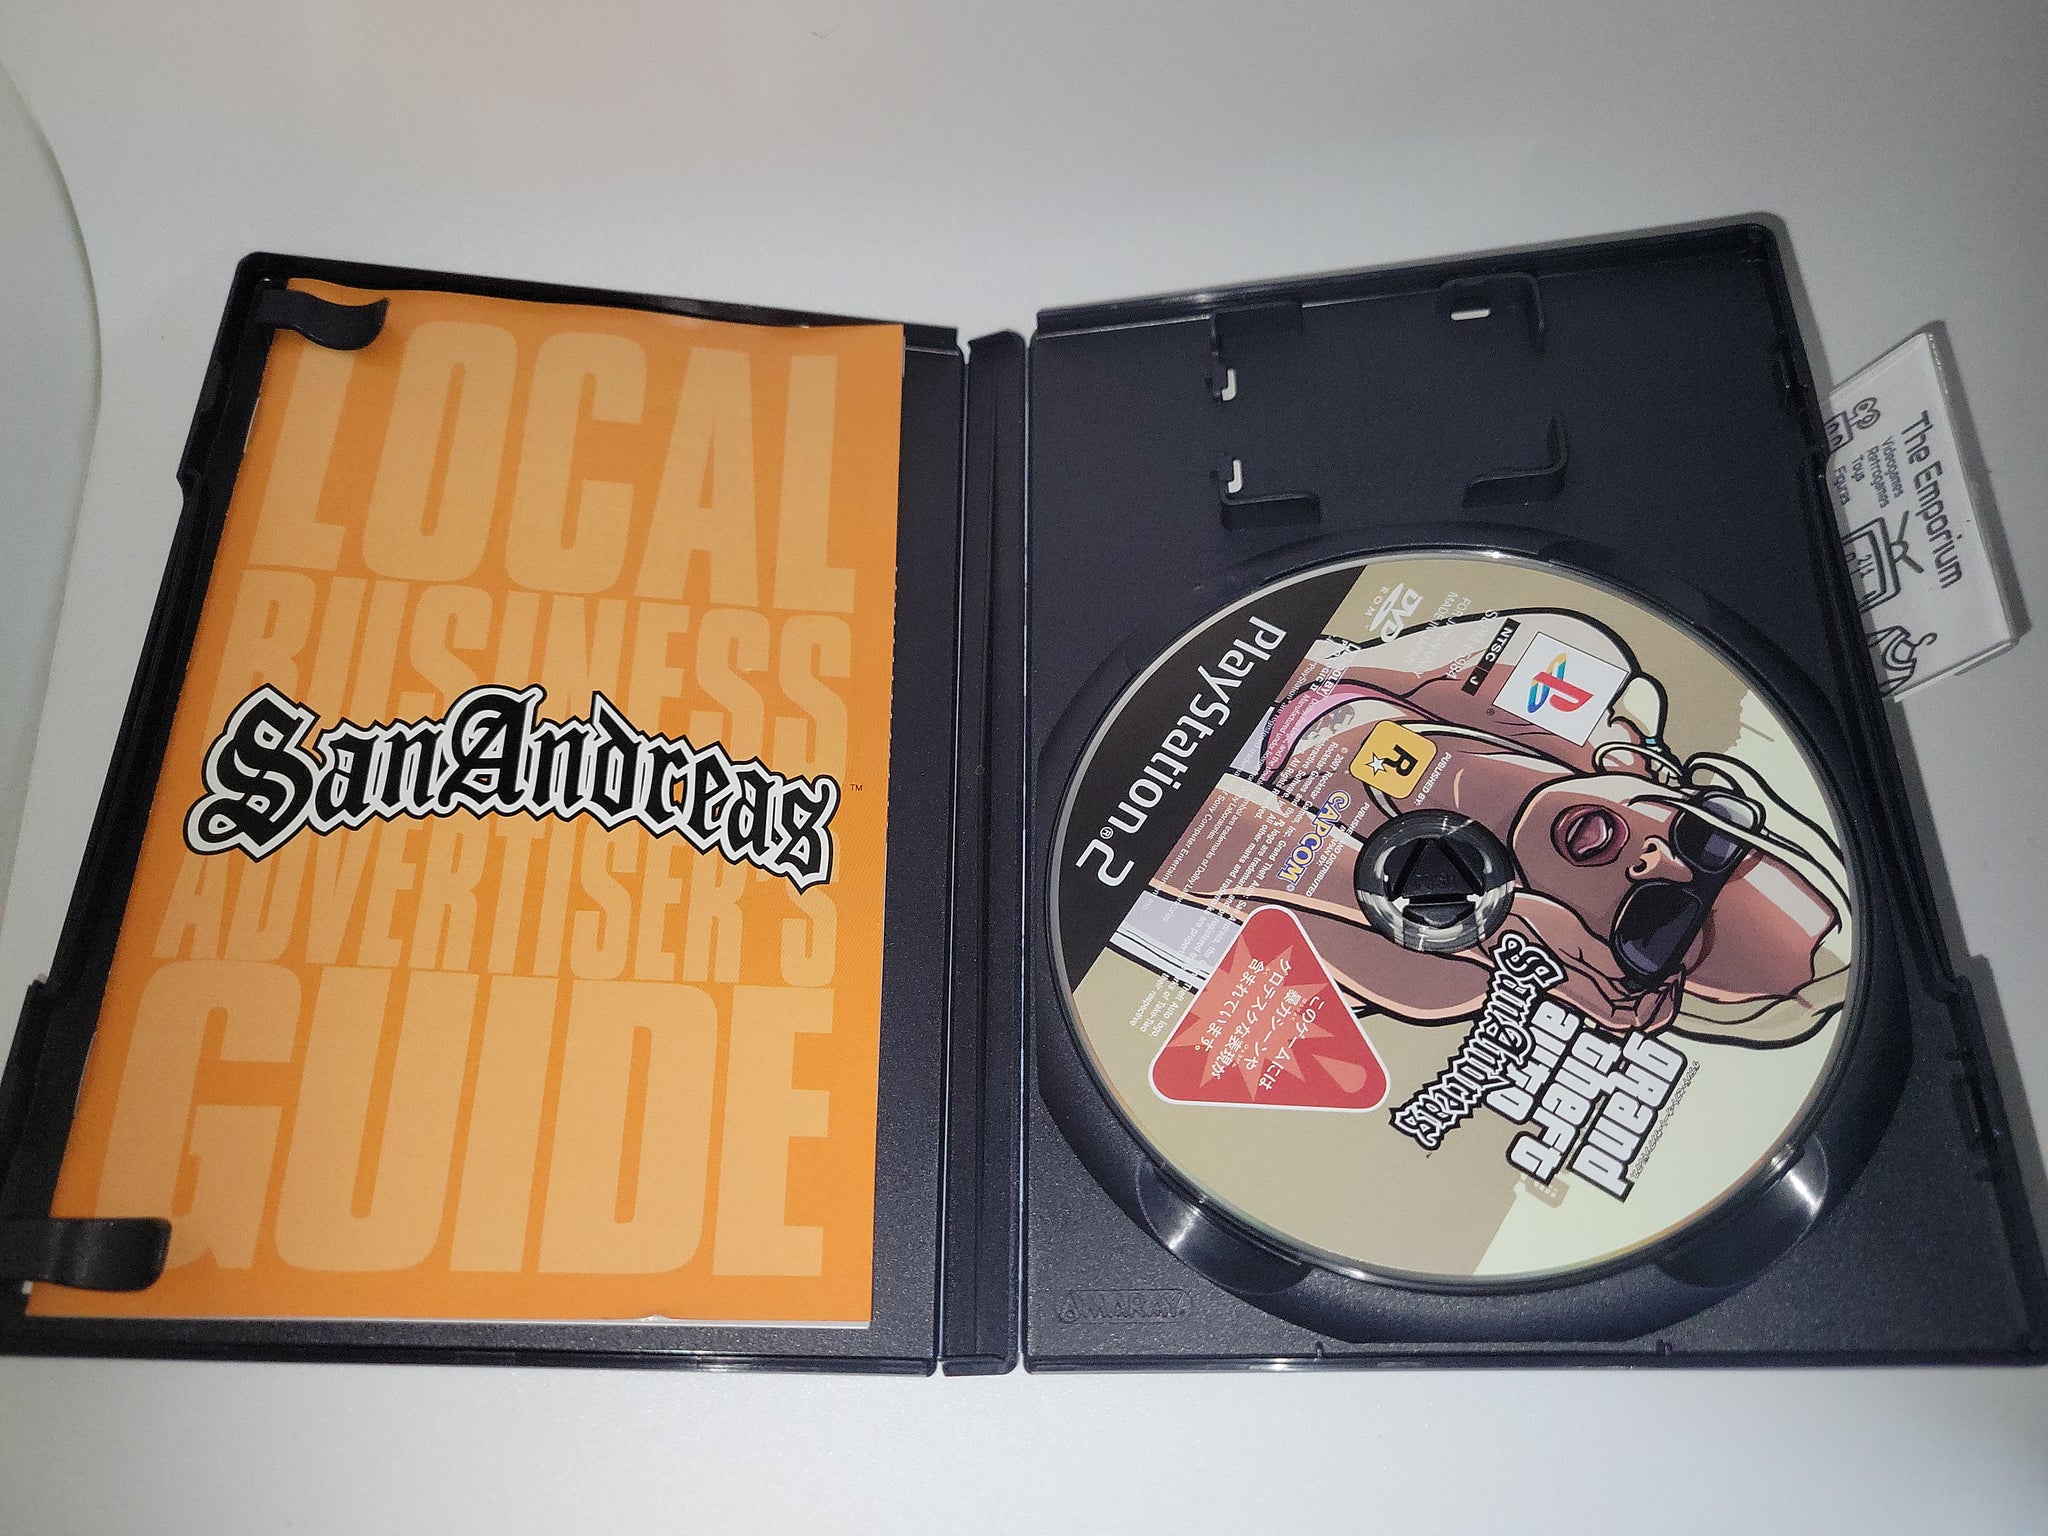 Grand Theft Auto: San Andreas Special Edition (PlayStation 2, PS2